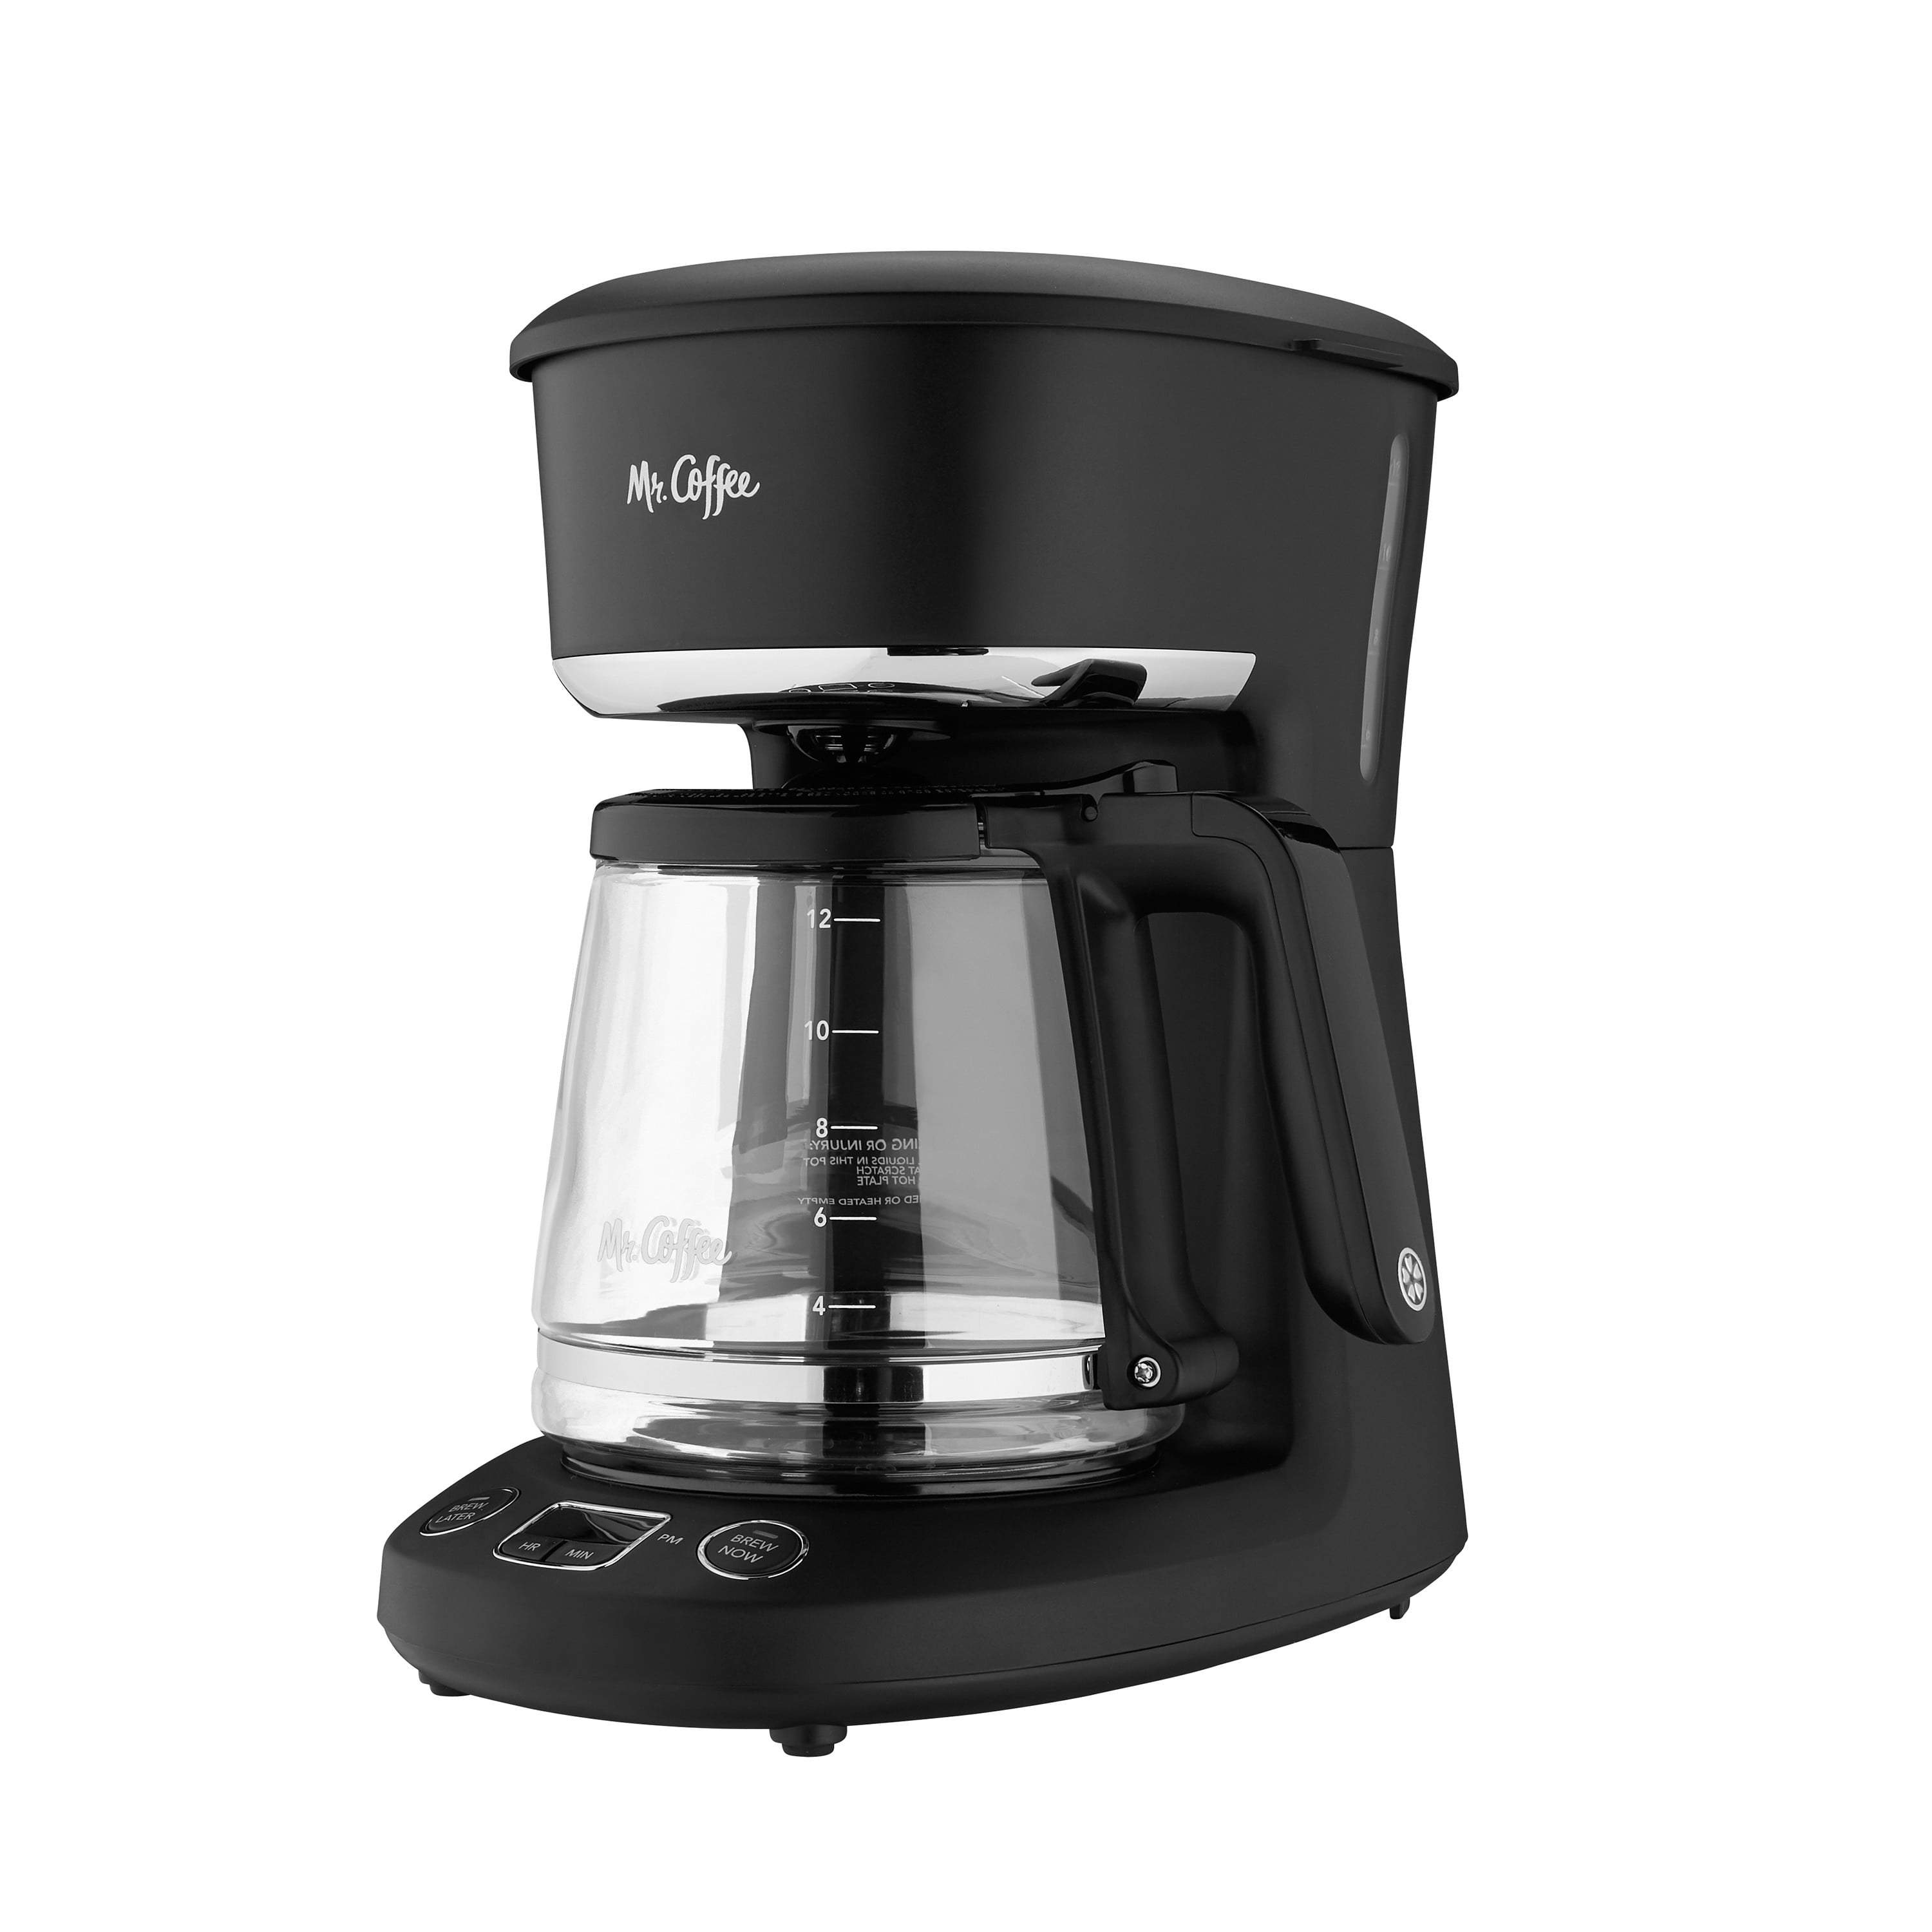 Mr. Coffee 12-Cup Programmable Coffeemaker, Brew Now or Later